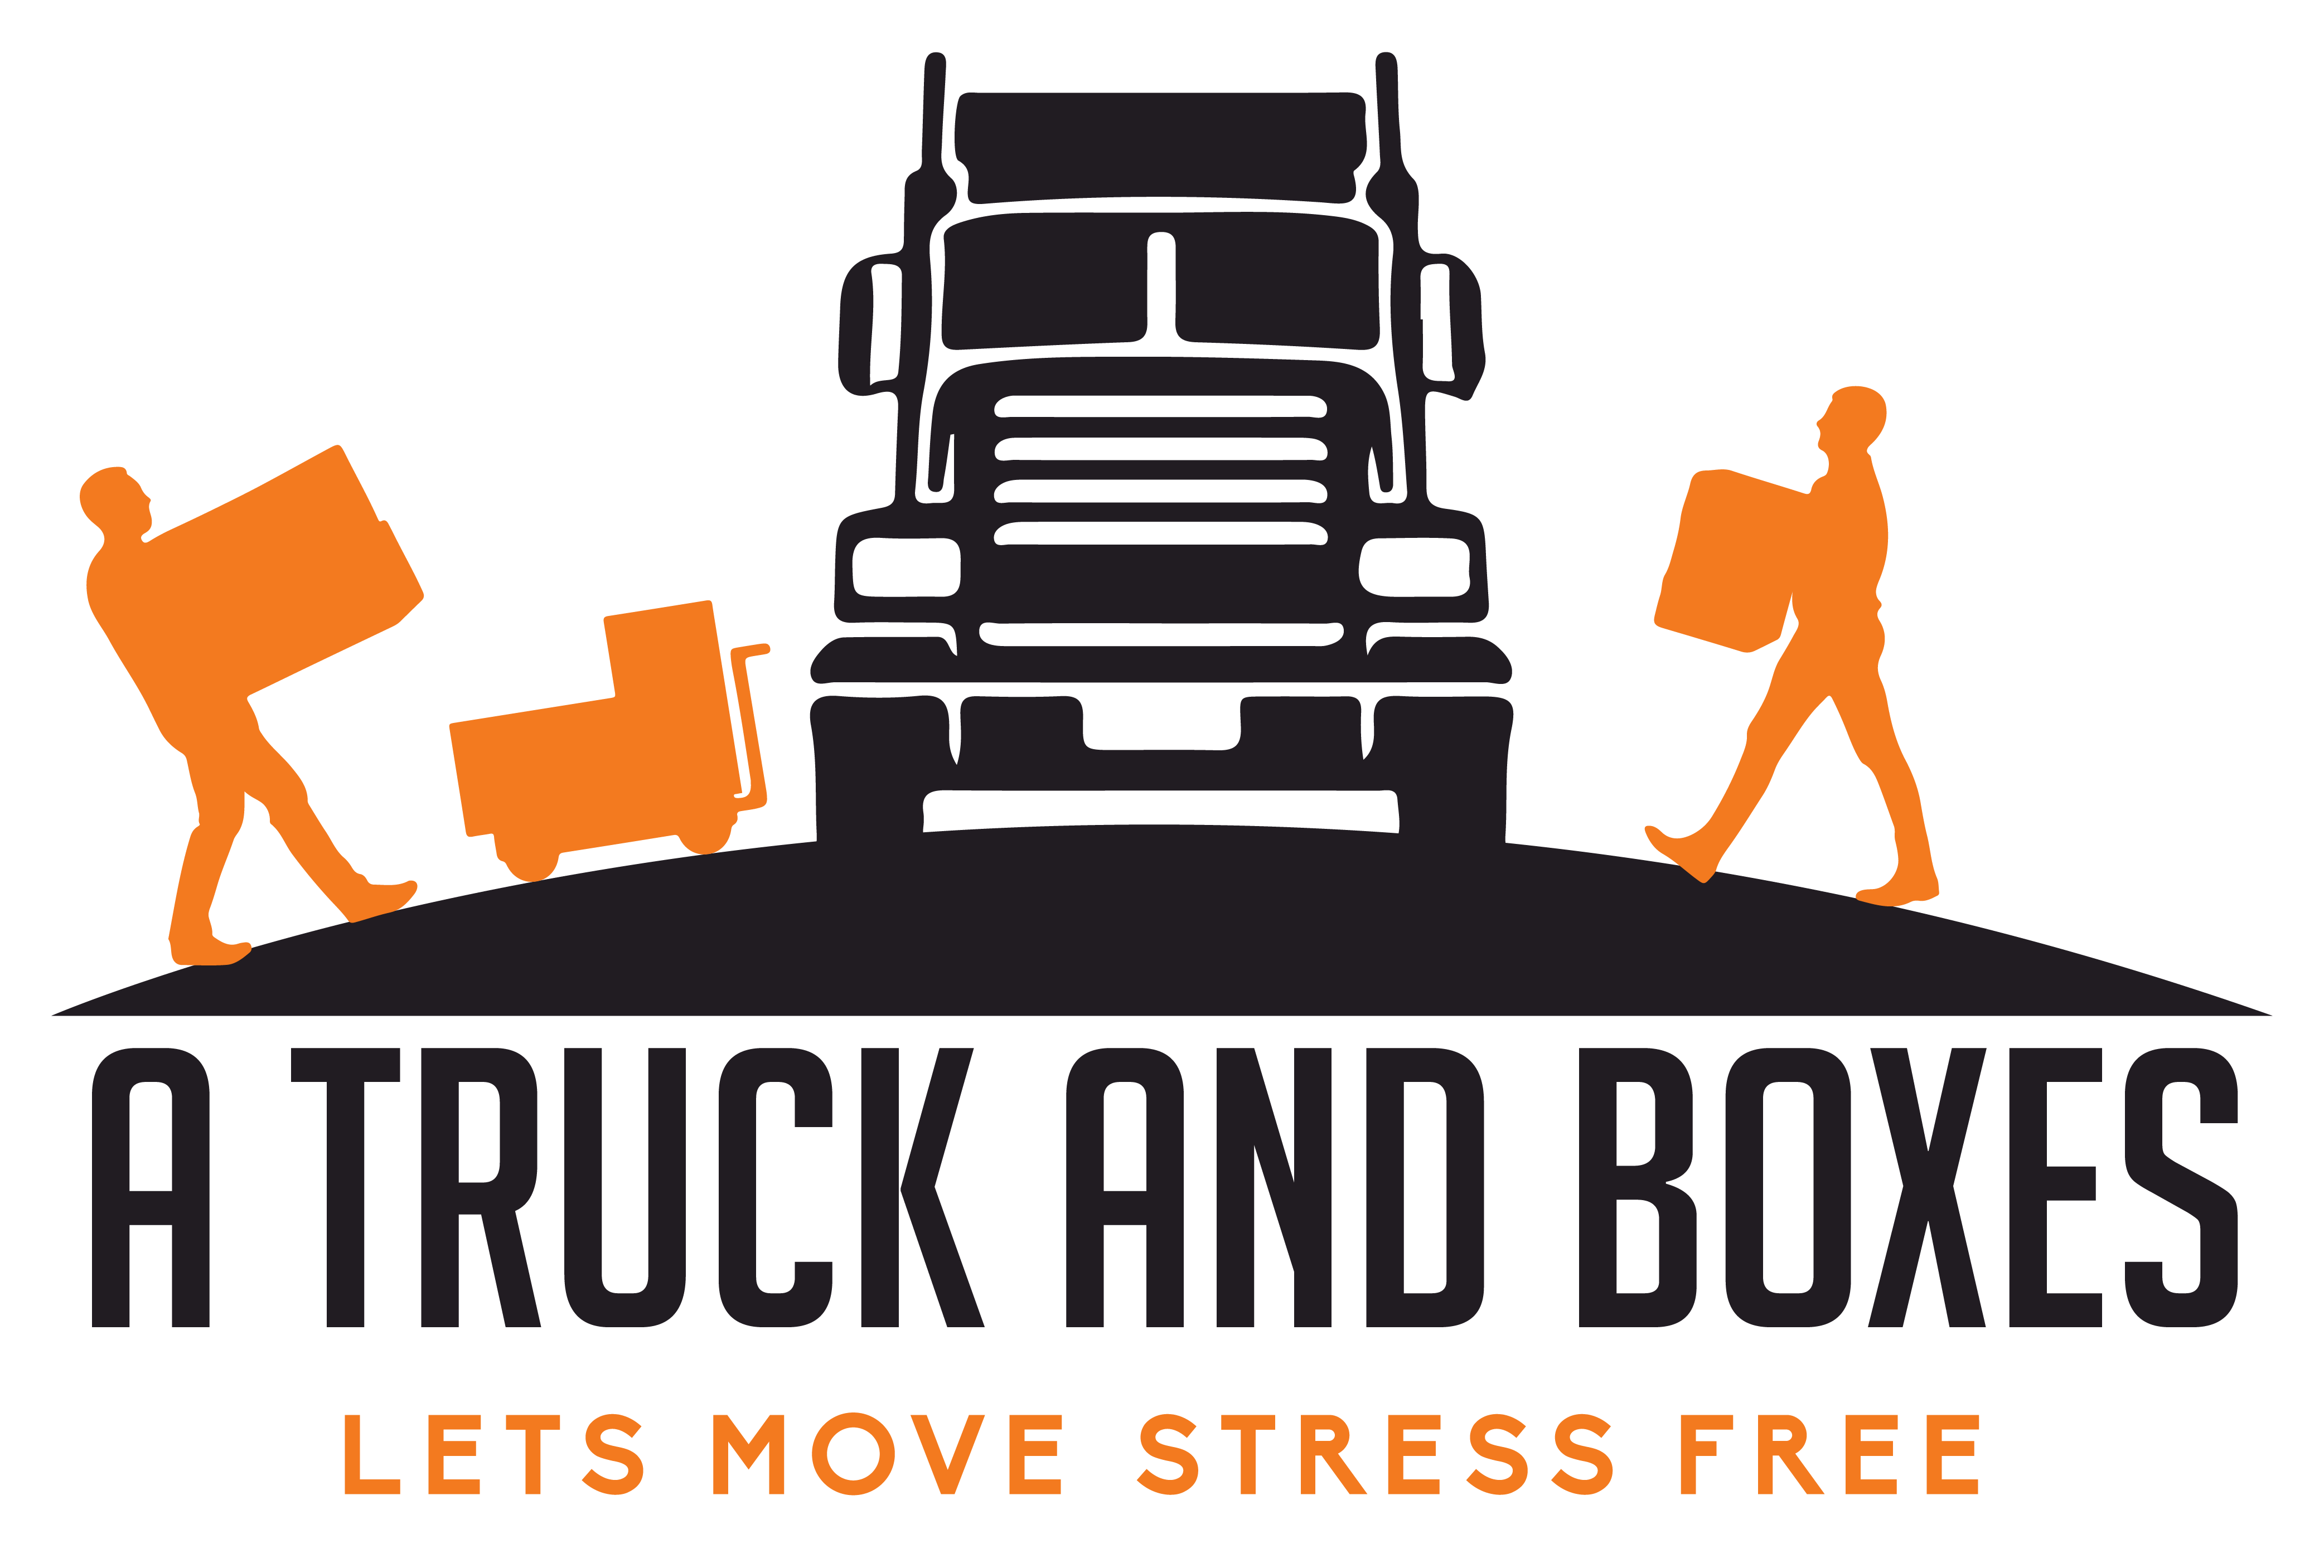 A Truck and Boxes Movers Logo